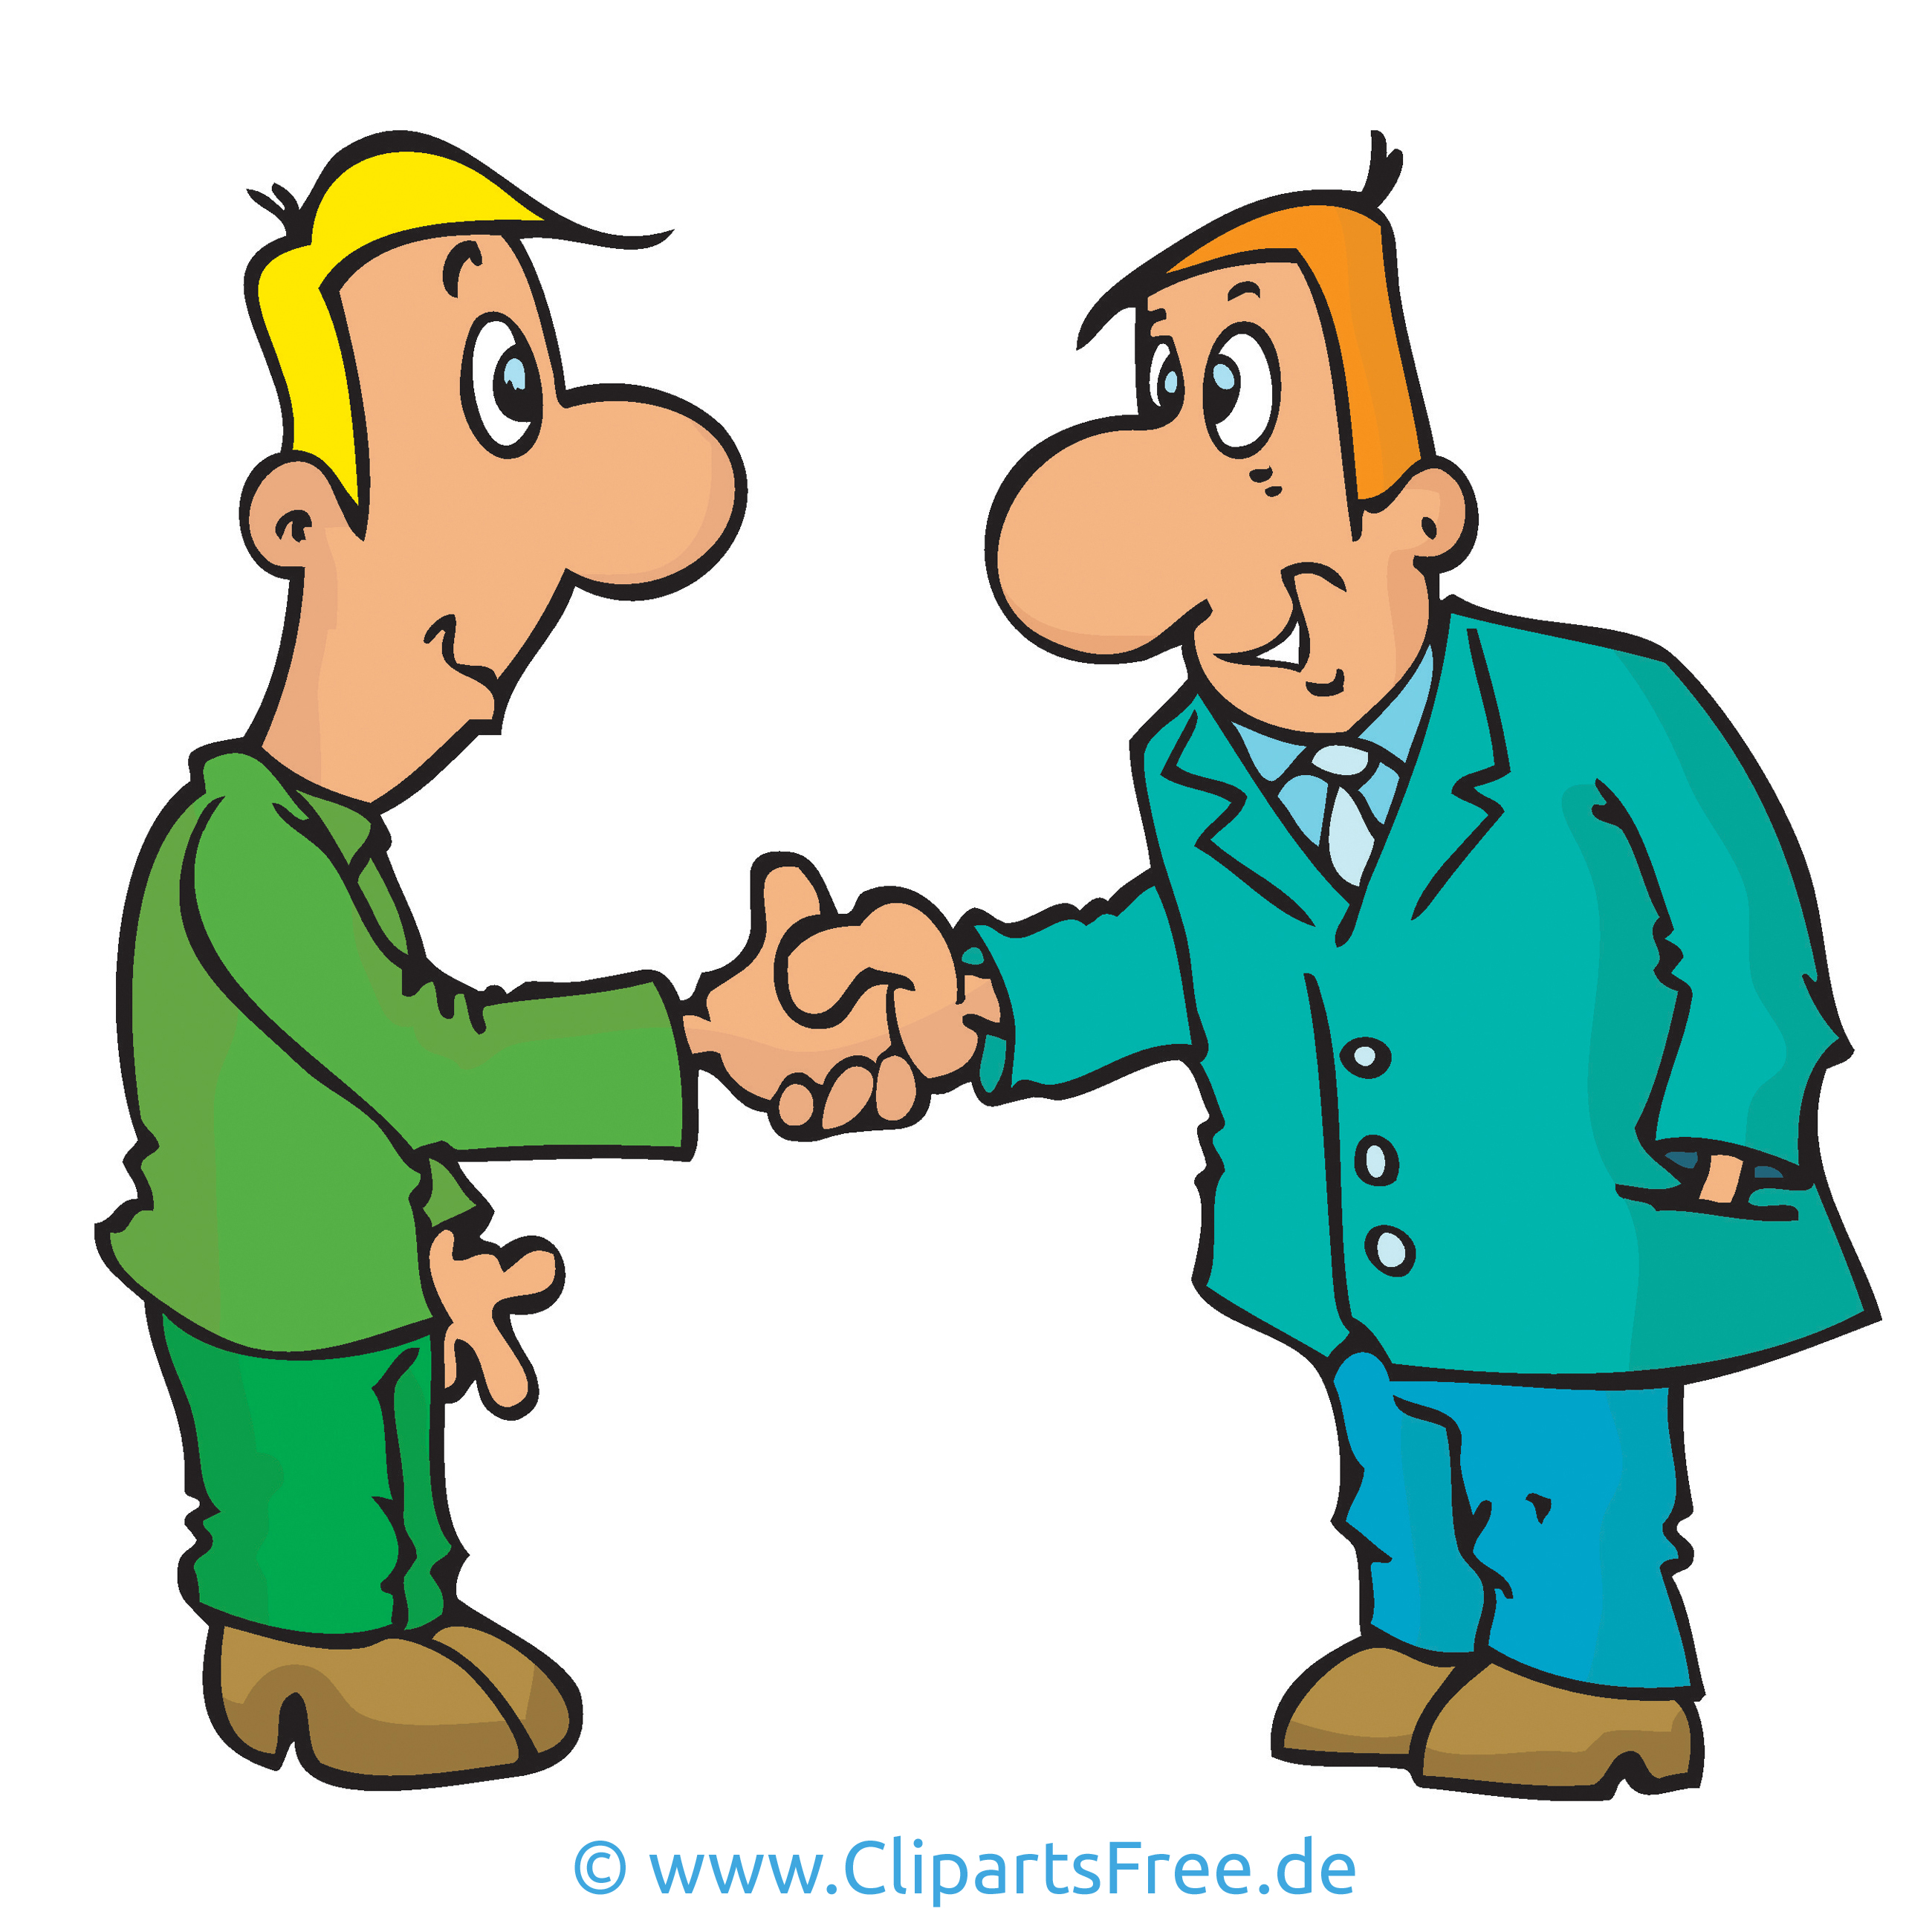 clip art meeting people - Clip Art Library